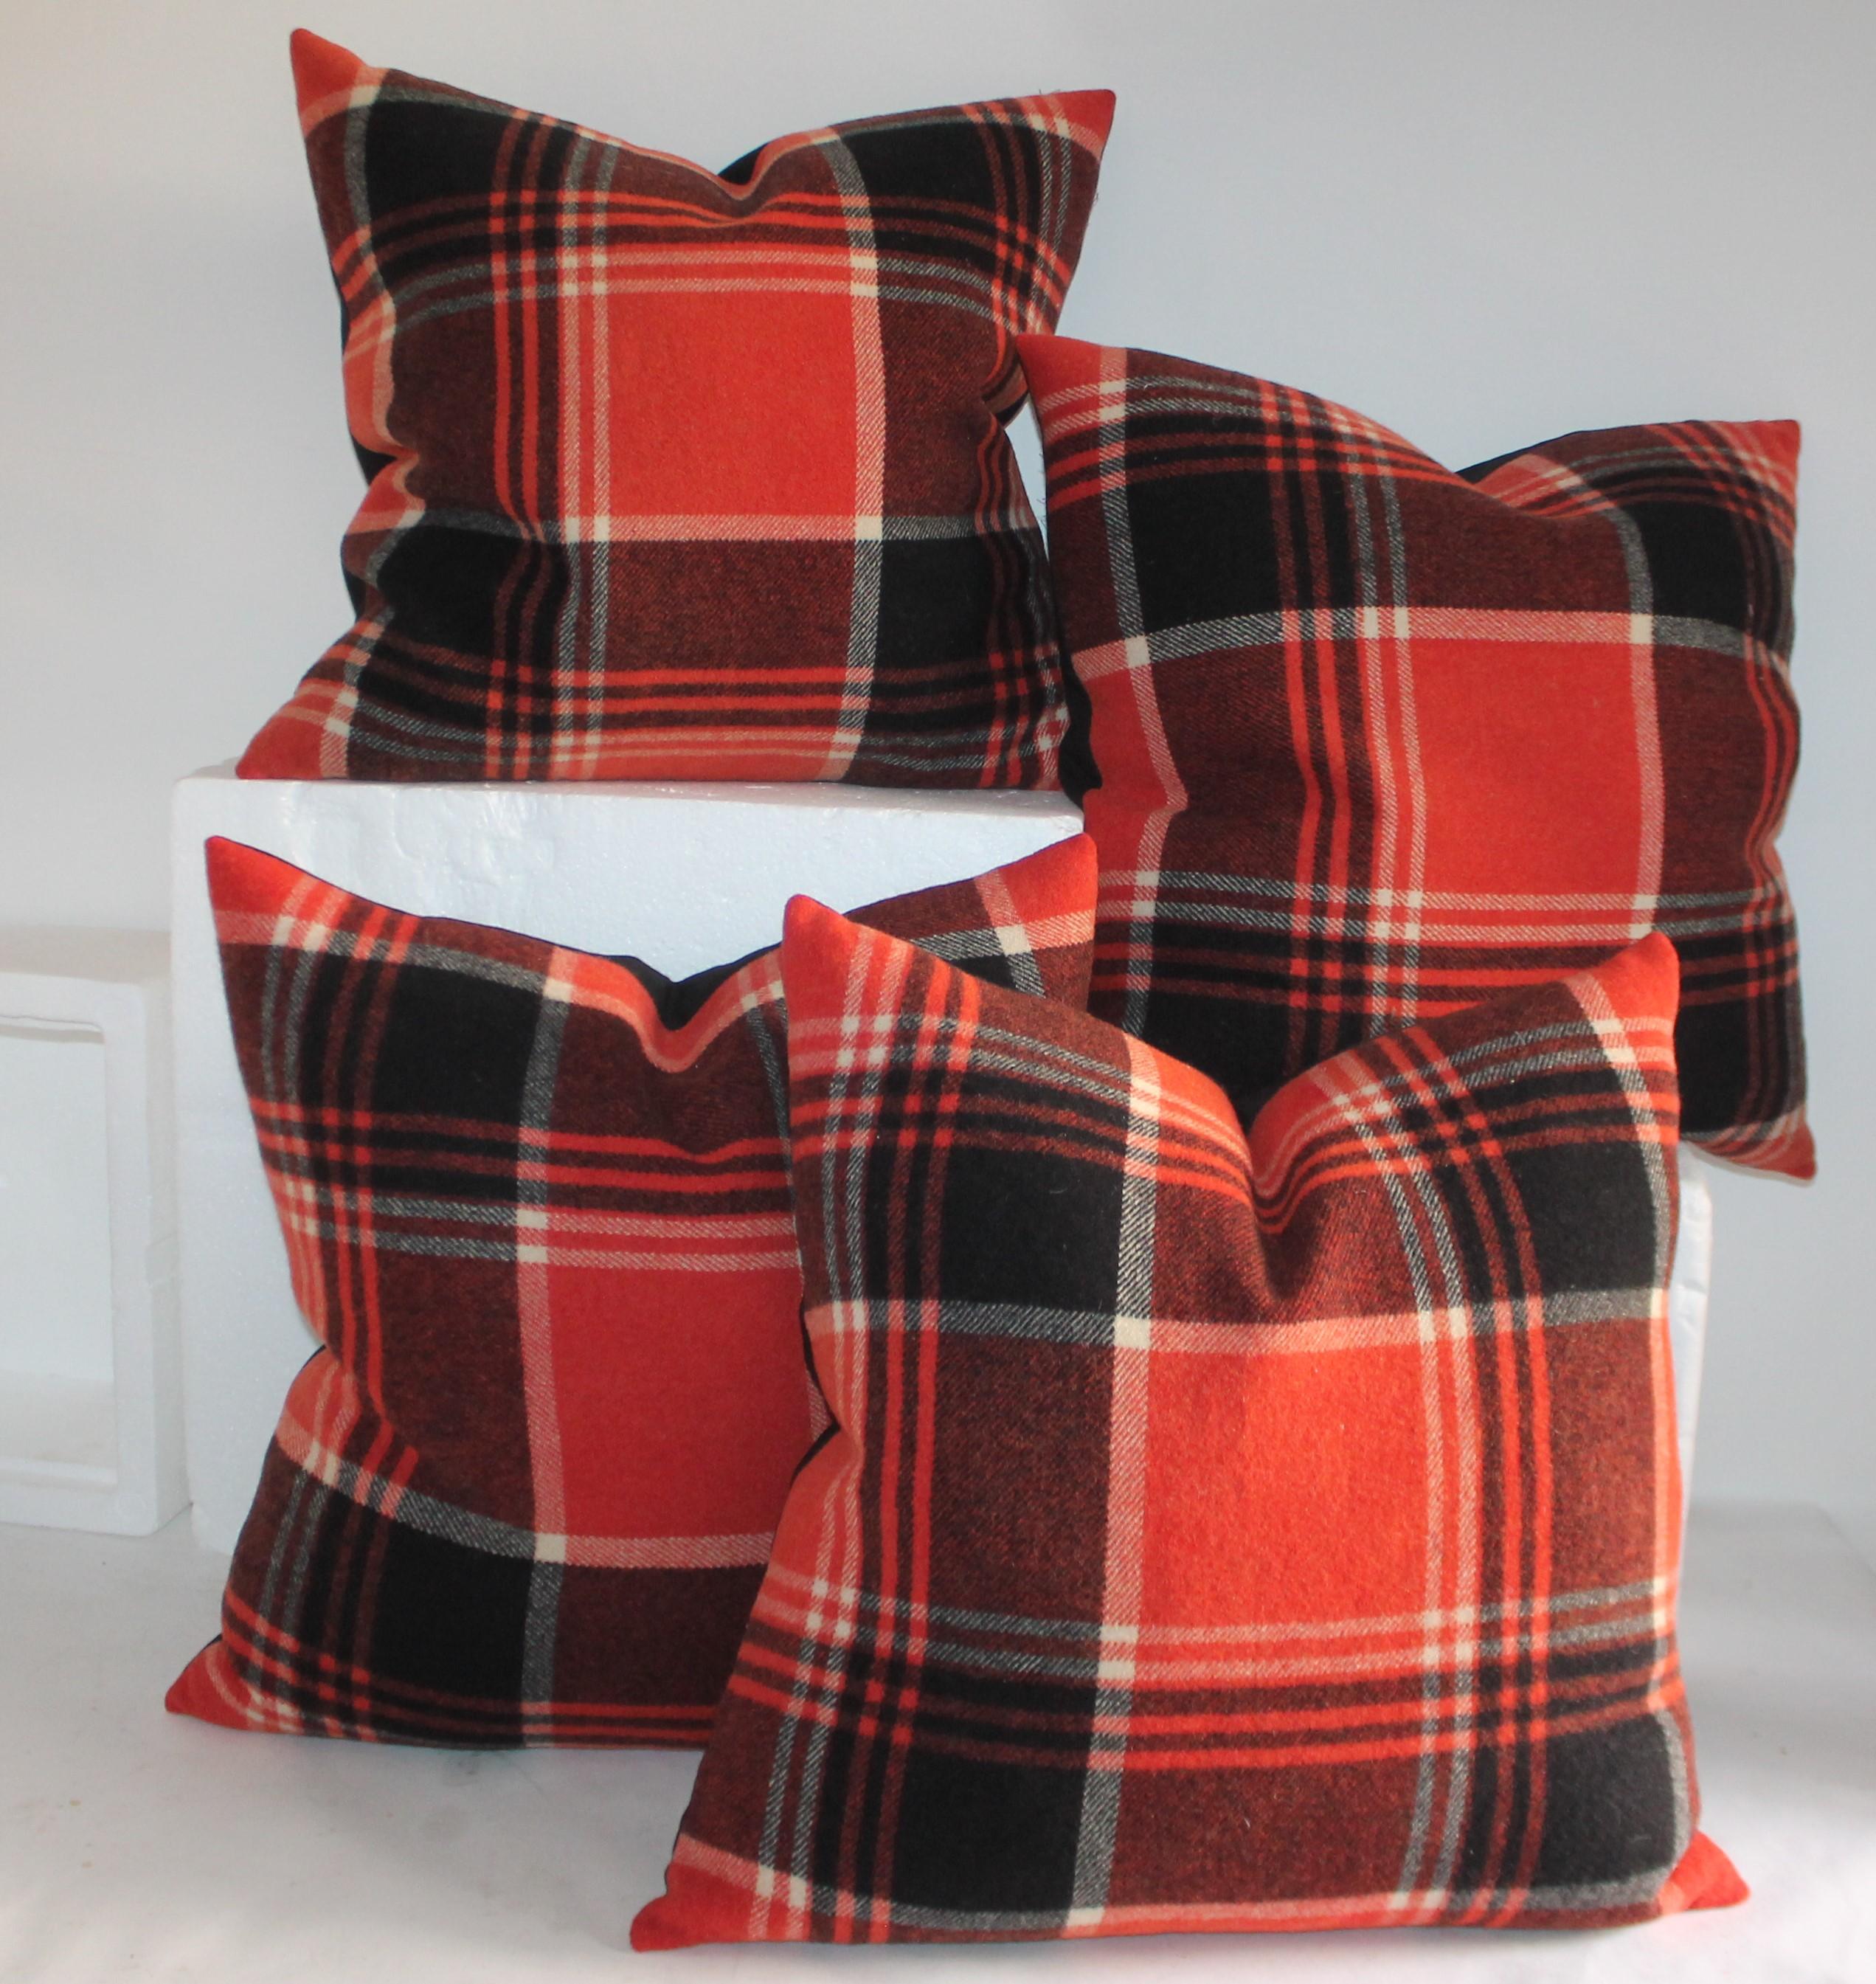 Collection of four black and red plaid pillows in great condition. The textiles were pulled from a vintage camp blanket made from wool. Beautiful pattern to the pillow with a vintage linen backing.